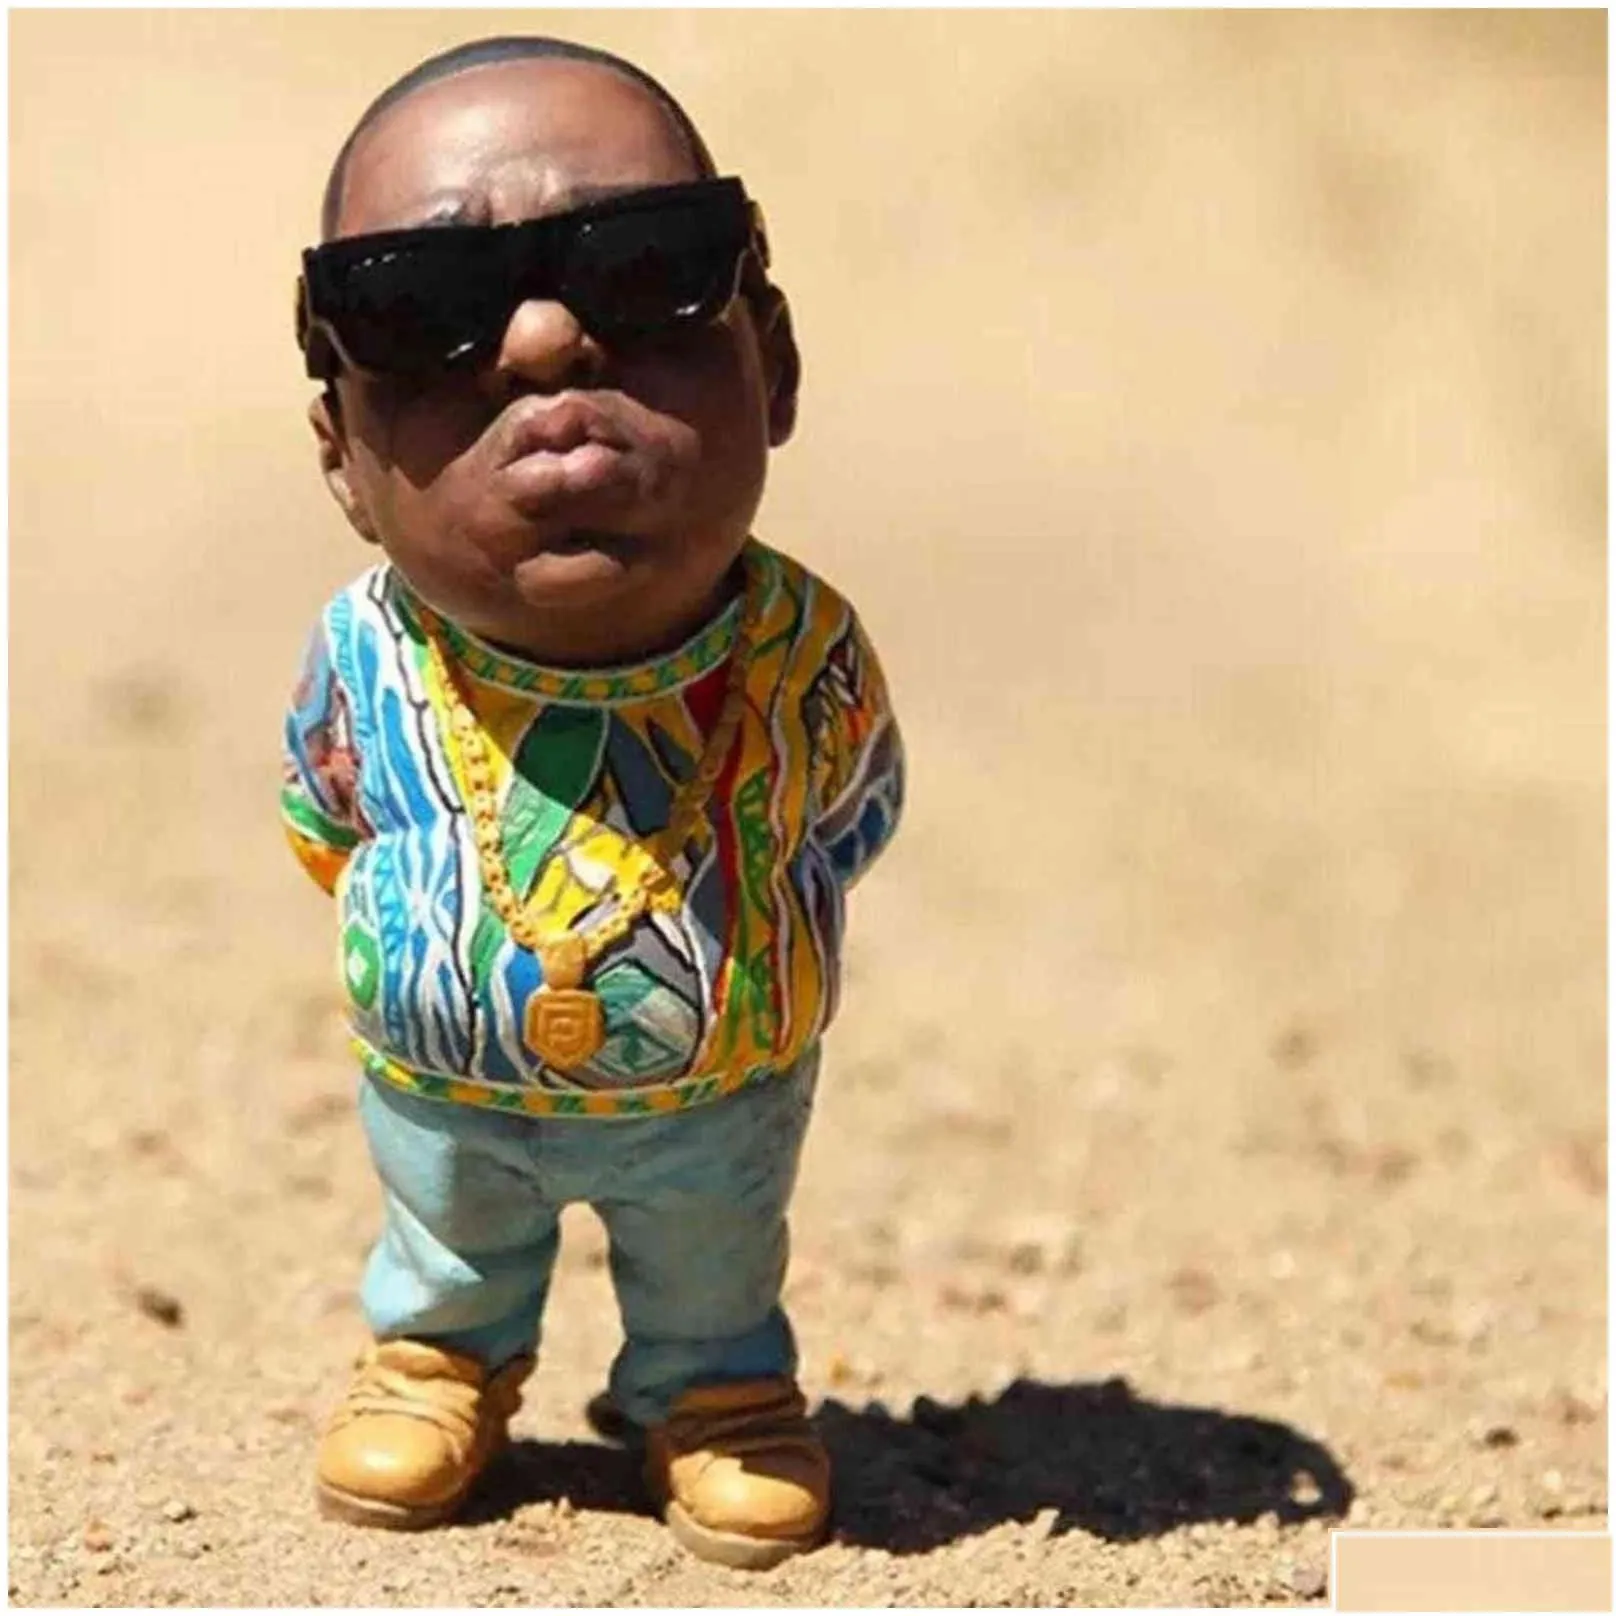 decorative objects figurines mini resin ornaments hip hop funny rapper bro figurine set for home indoor outdoor decorations party